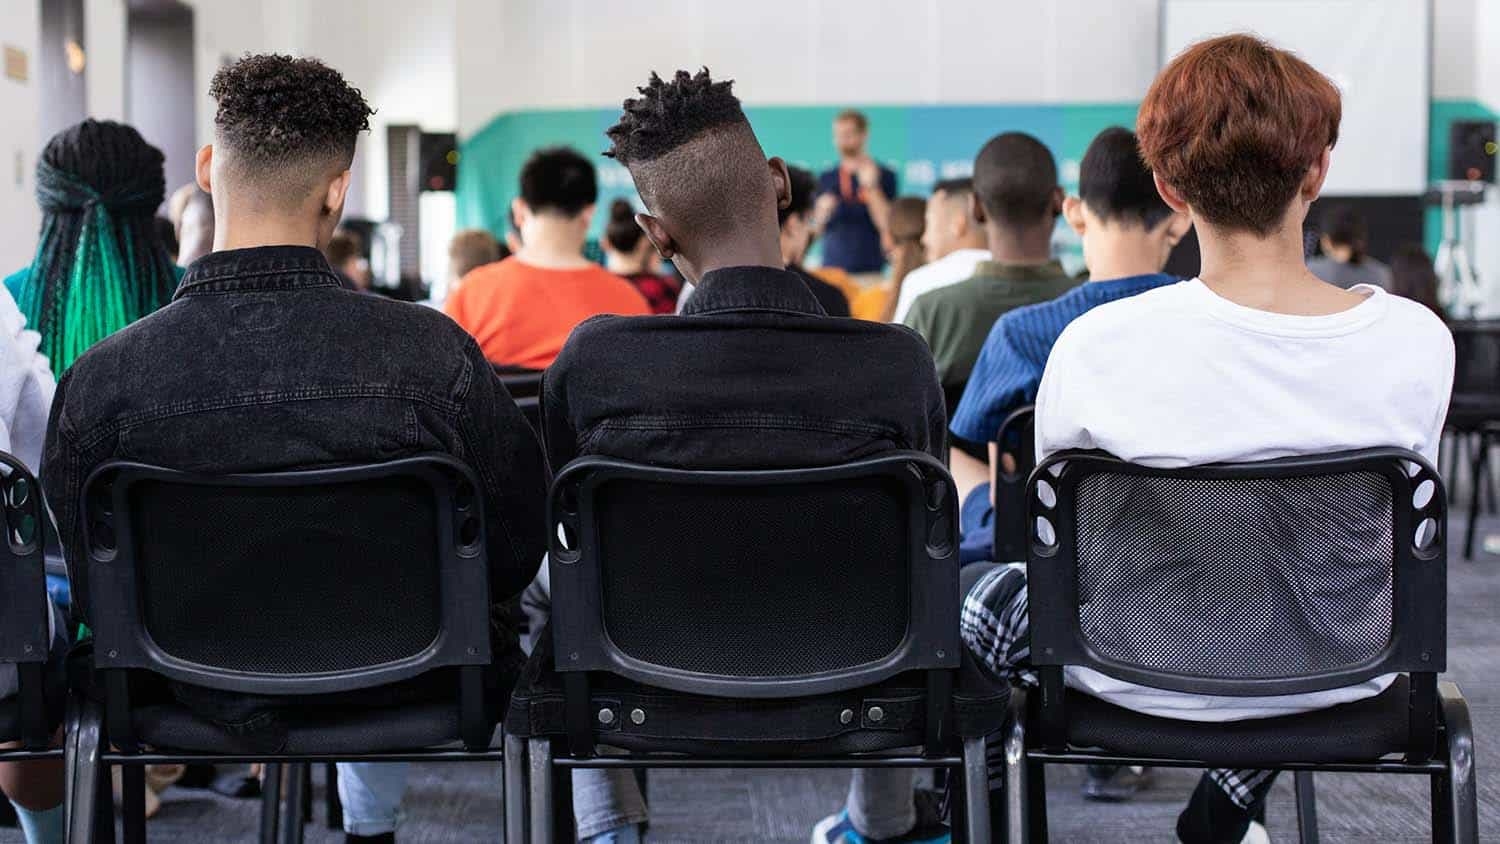 photo shows a classroom of students watching a teacher. the hairstyles of the three kids in the back row suggest they are of different races (you only see them from behind)